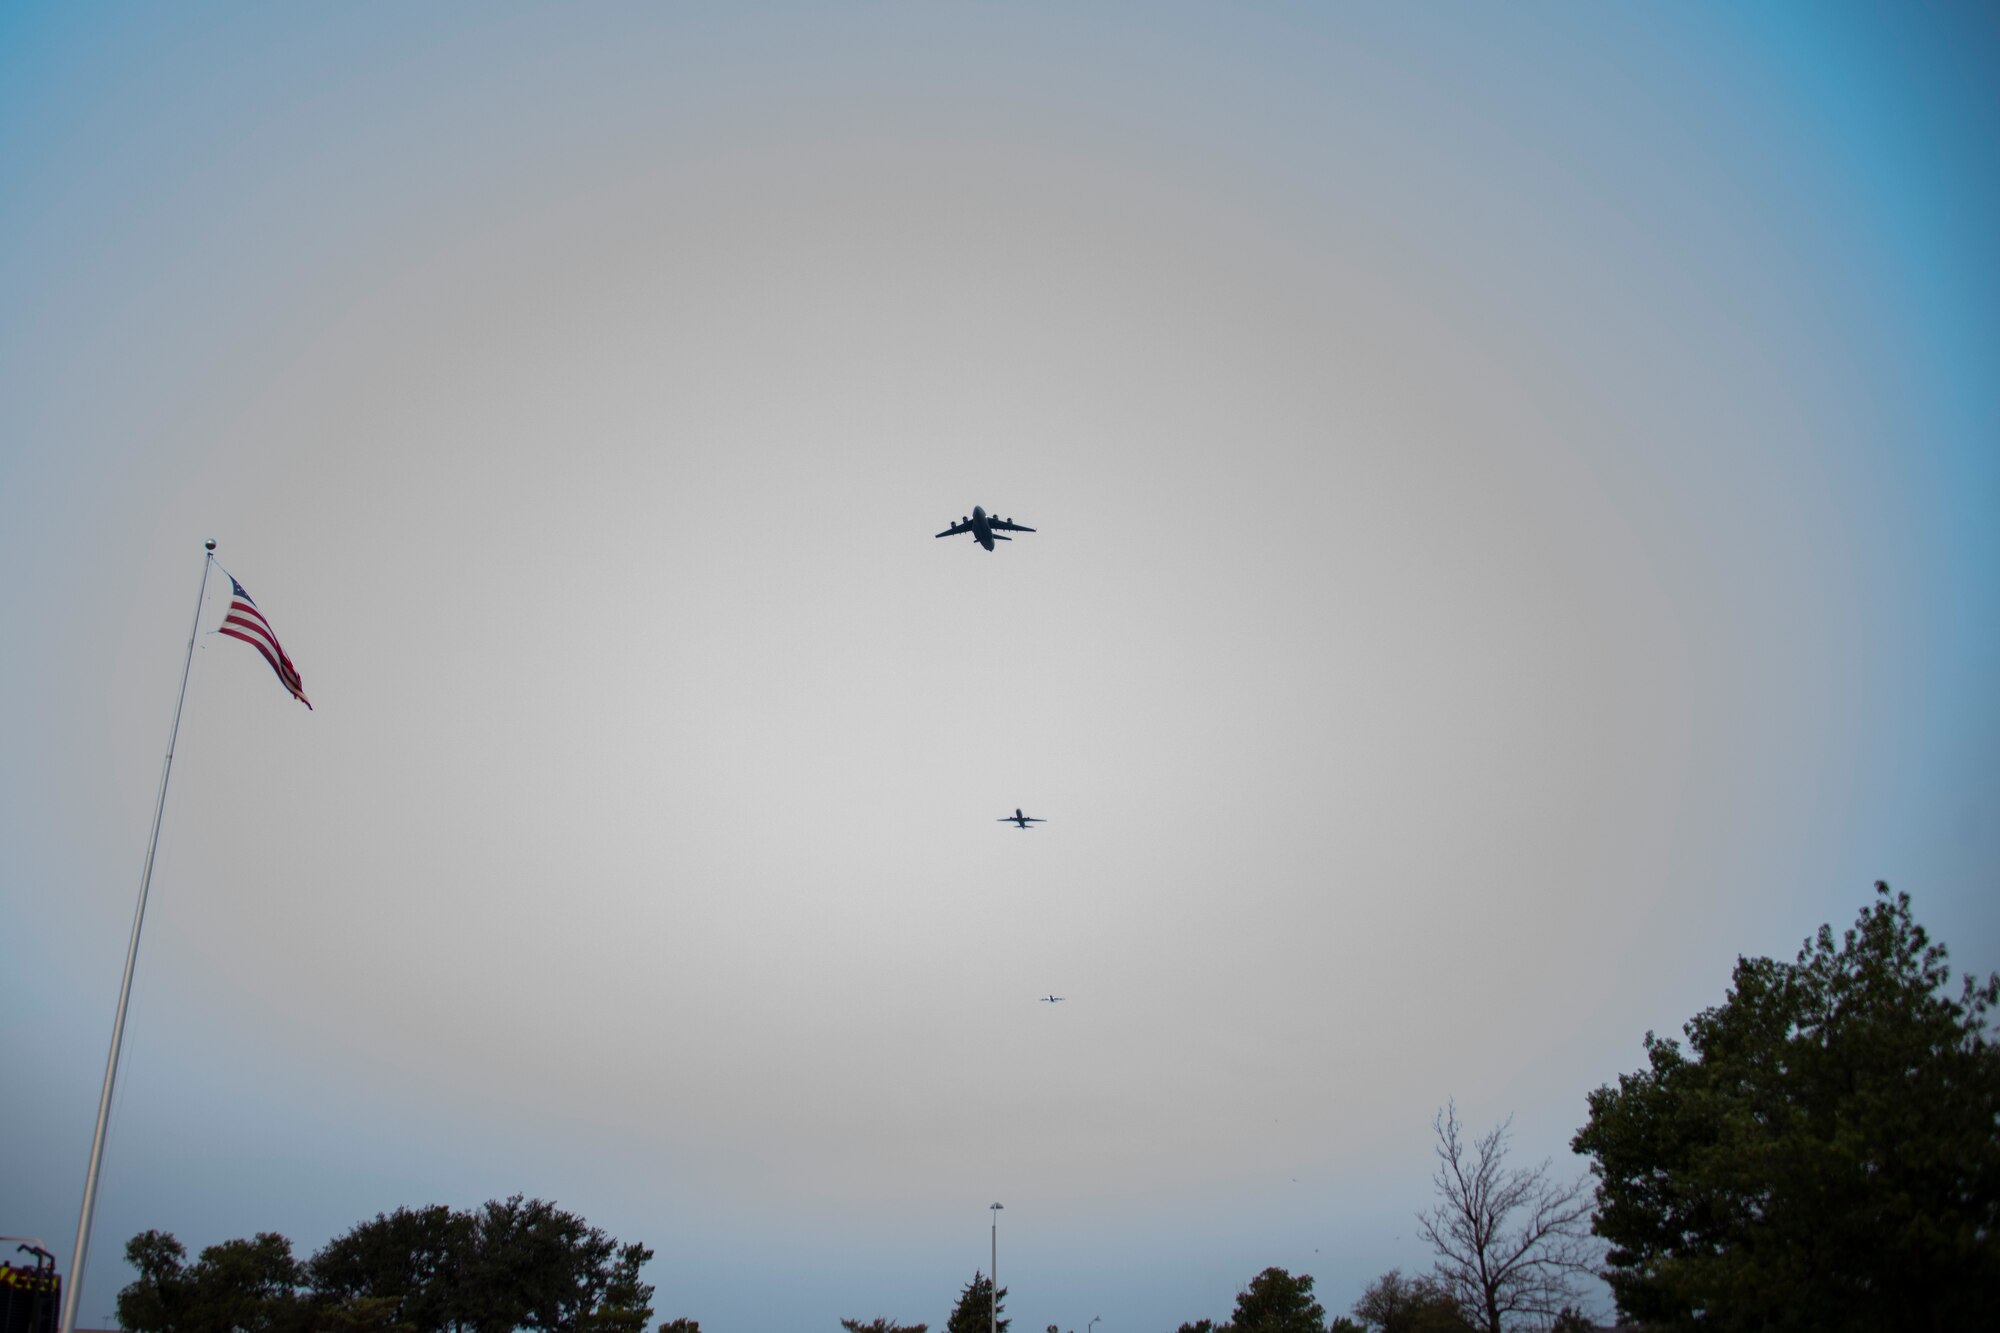 A C-17 Globemaster III, KC-135 Stratotanker, and KC-46 Pegasus fly over the 97th Air Mobility Wing (AMW) Remembrance Ceremony at Altus Air Force Base, Oklahoma, Sept. 11, 2021. This was the first time in 97th AMW history that all three aircraft flew over an event at the same time. (U.S. Air Force photo by Senior Airman Amanda Lovelace)